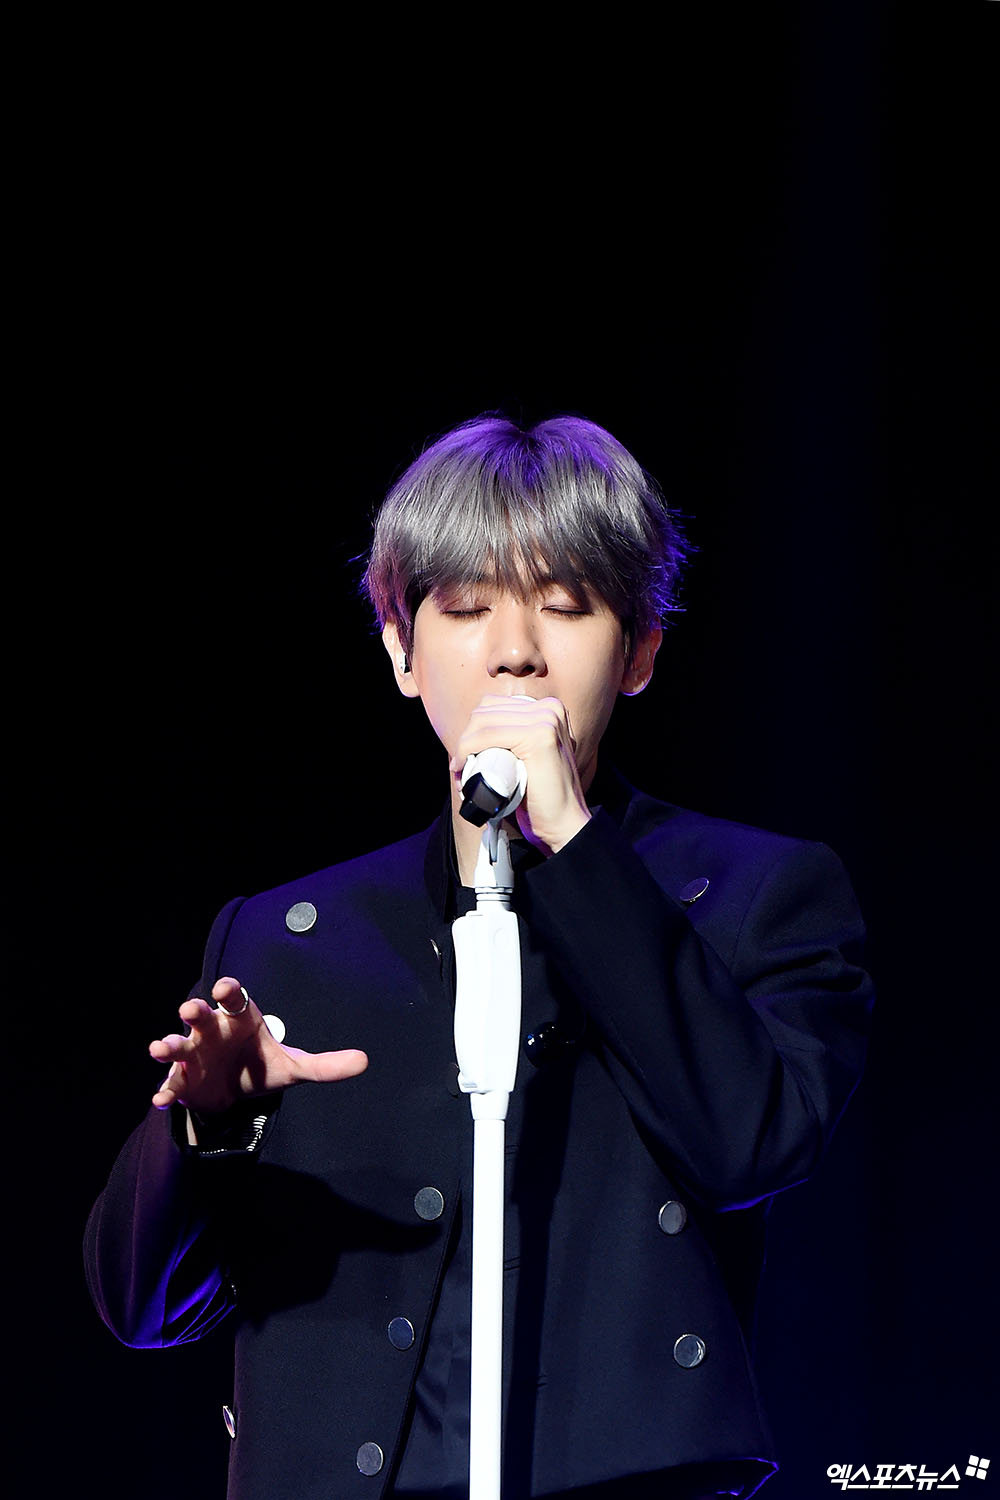 EXO Baekhyun reveals light in soloOn the 10th, a showcase was held at the SAC Art Hall in Gangnam-gu, Seoul to commemorate the release of the group EXOs Baekhyuns solo album City Lights.EXOs main vocalist, Baekhyuns first solo, City Lights, featured six songs in a trendy atmosphere. Baekhyuns superpower was reflected in the albums name because it was light.The title is United Nations Village and is a romantic R&B song.Baekhyuns solo album was prepared from late last year; he said, From the end of last year, the company started preparing because I wanted to do it.The title song was delayed because it was not picked well.It took a total of eight months to come out. Today, there is no performance because the stage is narrow, but there is a plan to show a little performance in music broadcasting.I would be grateful if you could look at the room and say that it is another look of Baekhyun He said, I am trying to produce my solo album steadily starting with City Lights. I will show you the shape of Baekhyun, who plays various genres.Baekhyun, who had his first solo, was burdened: he had to digest the euphemism alone, not the part, and he was lonely that he had no members to lean on with.He was in the process of preparing for the concert, but after finishing the concert, he received his vocal lessons separately.Baekhyun said: When I was personally live, I felt comfortable and stable.I can feel myself, but others may not know, but I am taking lessons all the time.  I want to show you something distinctive color and stability that is Baekhyuns vocals while releasing a solo album. I did not know that one song was so hard.I called it part by part, and I called it a word or two and I was breathing. I thought I should fill my voice with one song. I had forgotten where to breathe and control. He confessed, I was shocked by my own appearance and made more efforts. He explained that he was cautious to make more complete adjustments.I think everyone who sings solo is great, he said, admiring all those who played solo as Top Model.I tried hard to show my charm as a solo singer, Baekhyun, not EXO main vocal BaekhyunAbout the new song United Nations Village, Baekhyun said, Personally, it is good to listen at night, drive and use public transportation.When I want to have a park or alone in front of me, I would like to wear an earphone and listen to the cool air. I called it out of power unlike EXO songs.I hope you feel that tone, he also introduced the point of appreciation.When I listen to the song, I get a judgement in 10 seconds, but its my song, so Im not saying this, but I was caught in 10 seconds.I did not like the correction recording, but I also made the correction recording about 2,3 times. I wanted to include my own emotions.I would like to see that Baekhyun has this color because it shows a genre that I did not show well in my usual life. Baekhyuns City Lights, which has 400,000 pre-orders, is expected in many ways.Baekhyuns first Top Model, which has grown to praise those who have seen him for a long time at SM Entertainment such as Kenji and Isuman, is certainly expected.